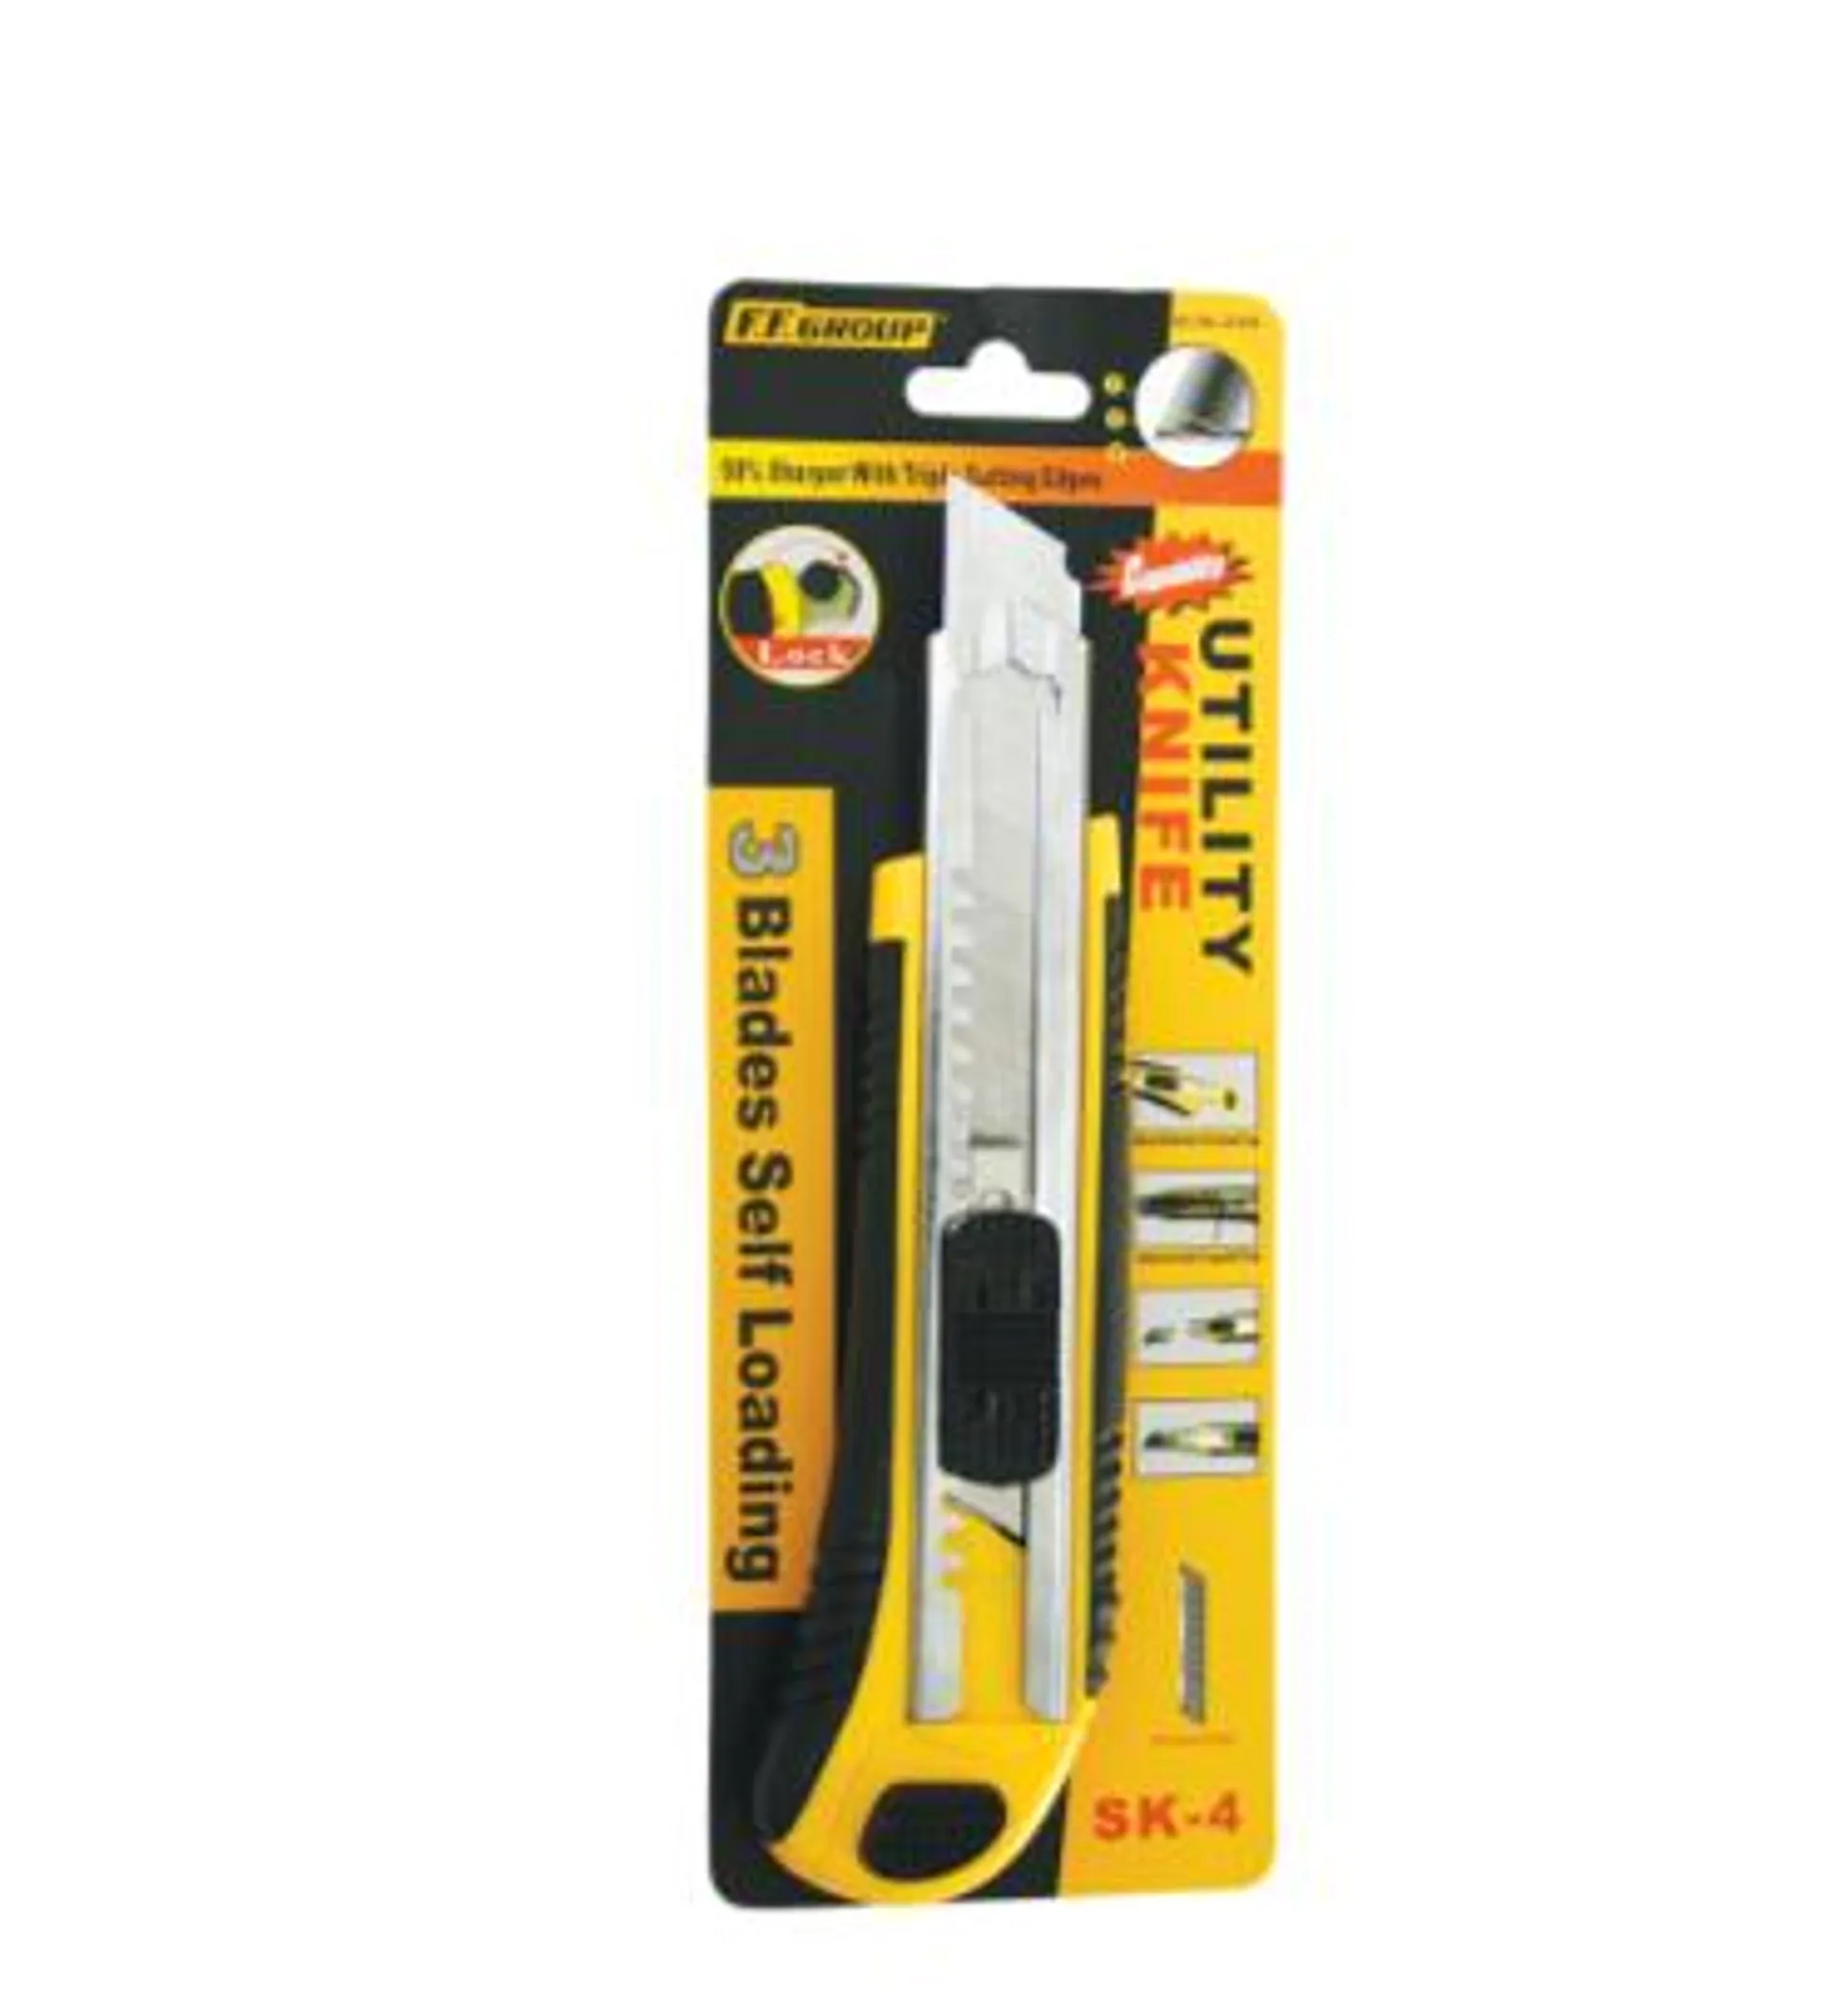 Auto loading utility knife with 5 blades